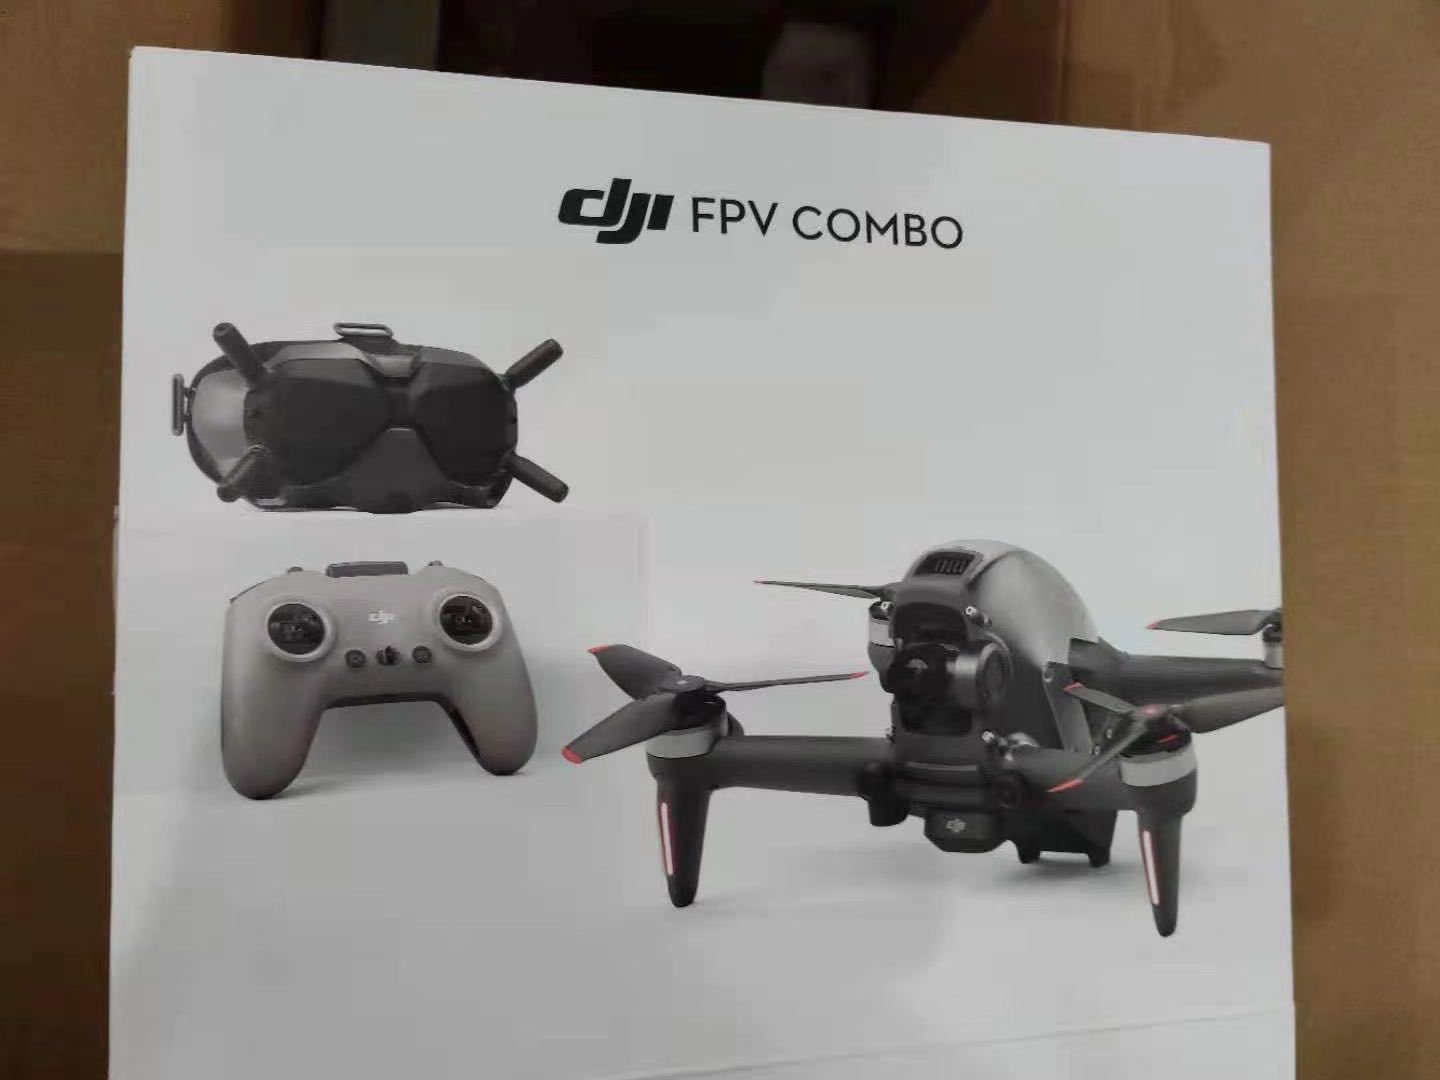 [PHOTO] DJI FPV Drone Leak: New Combo Features Goggles Racing Edition